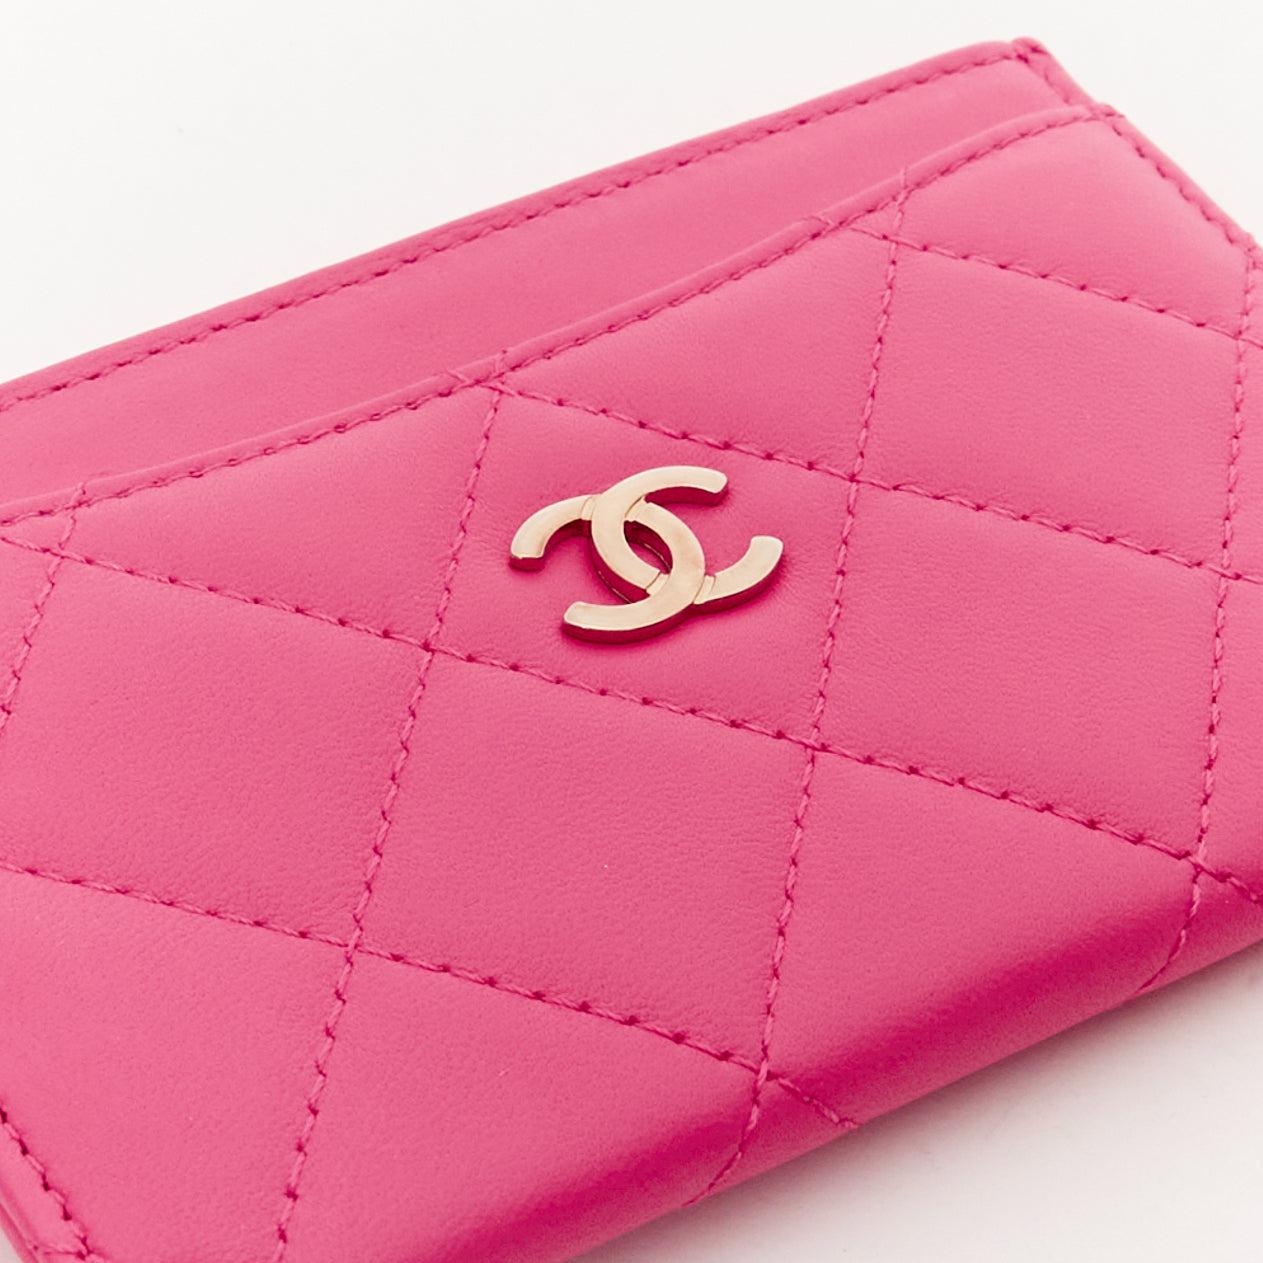 CHANEL bright pink smooth leather CC logo quilted cardholder For Sale 1